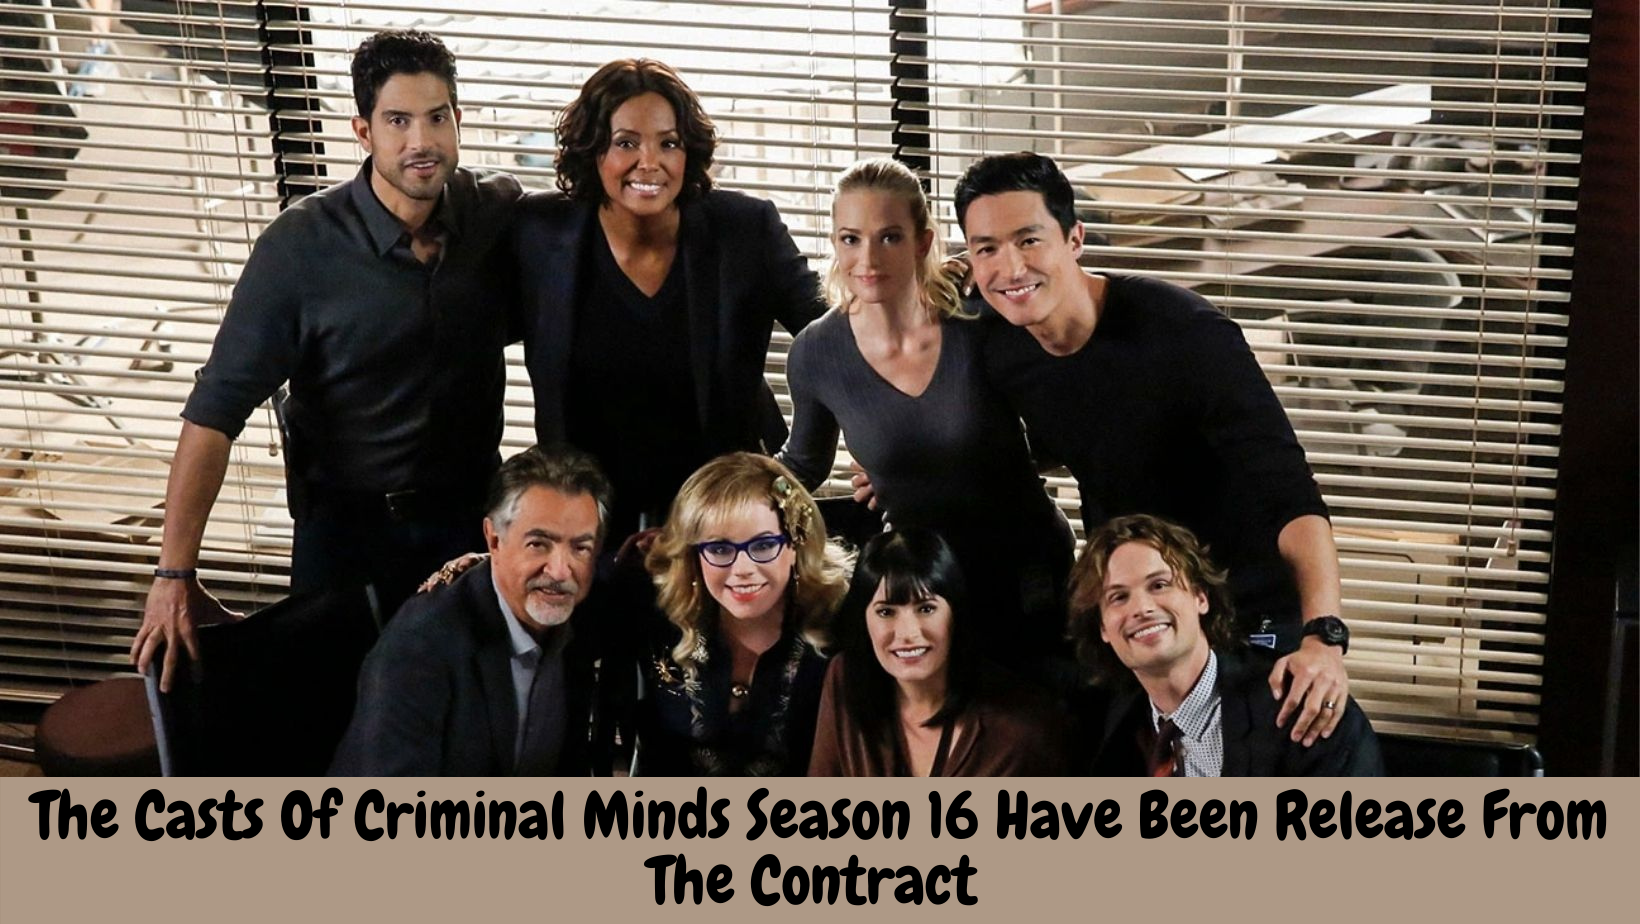 The Casts Of Criminal Minds Season 16 Have Been Release From The Contract 